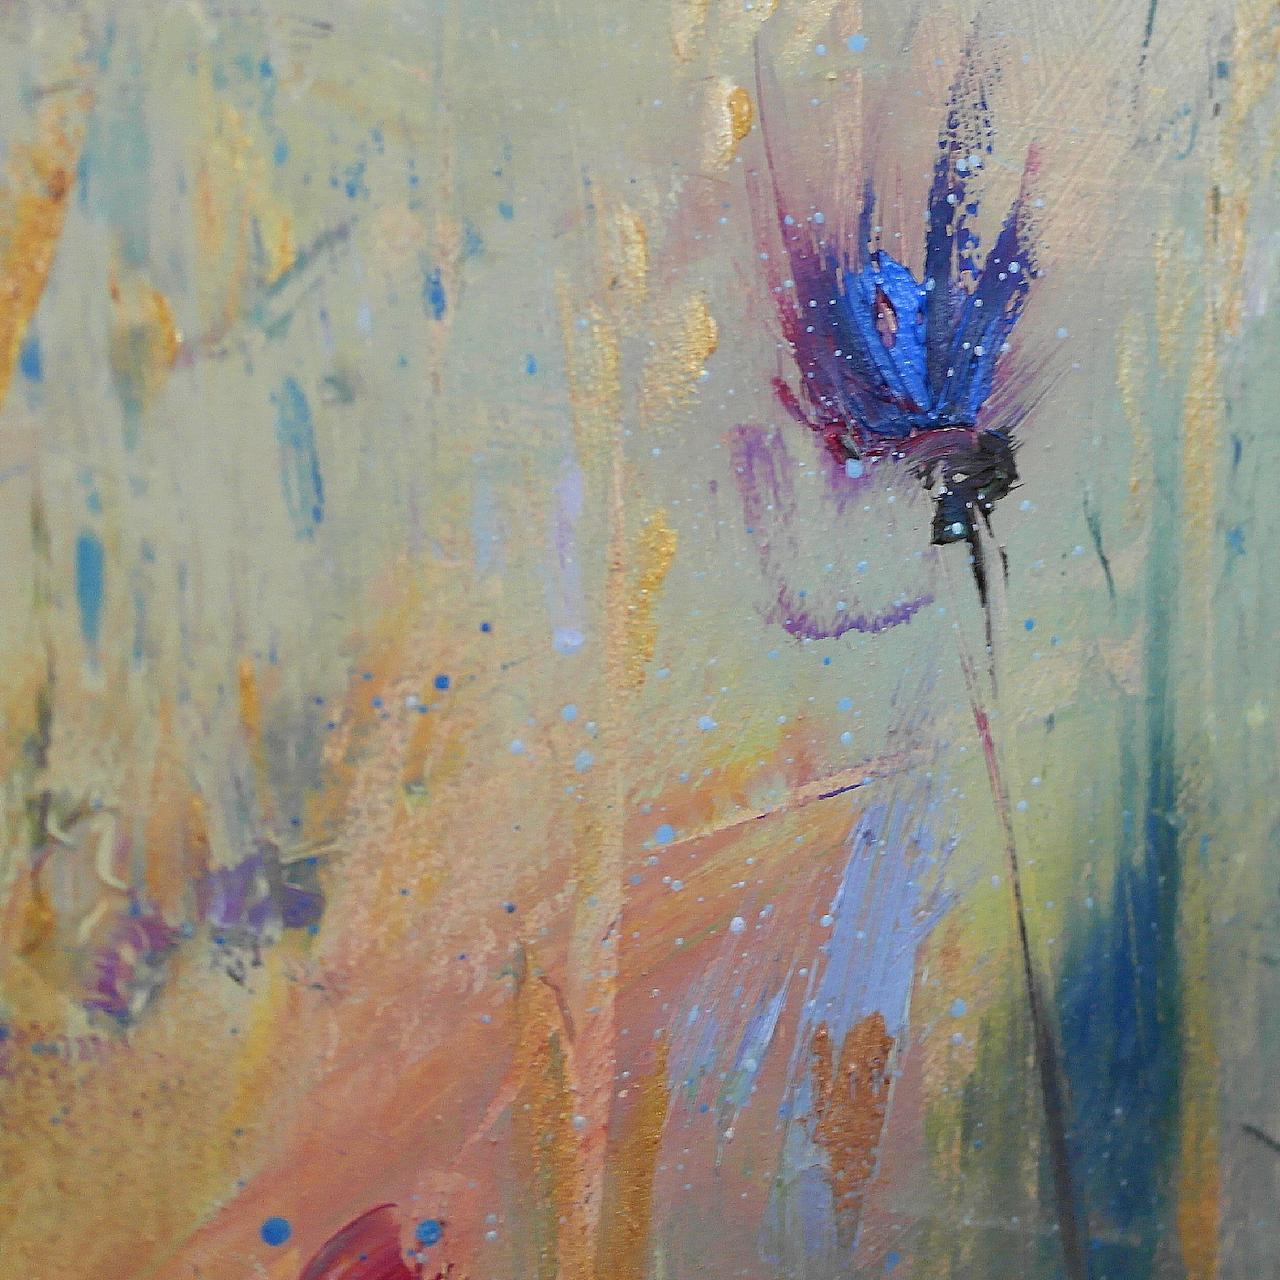 Libbi Gooch, Lower Field with Thistles, Bright Semi-Abstract Landscape Painting 1